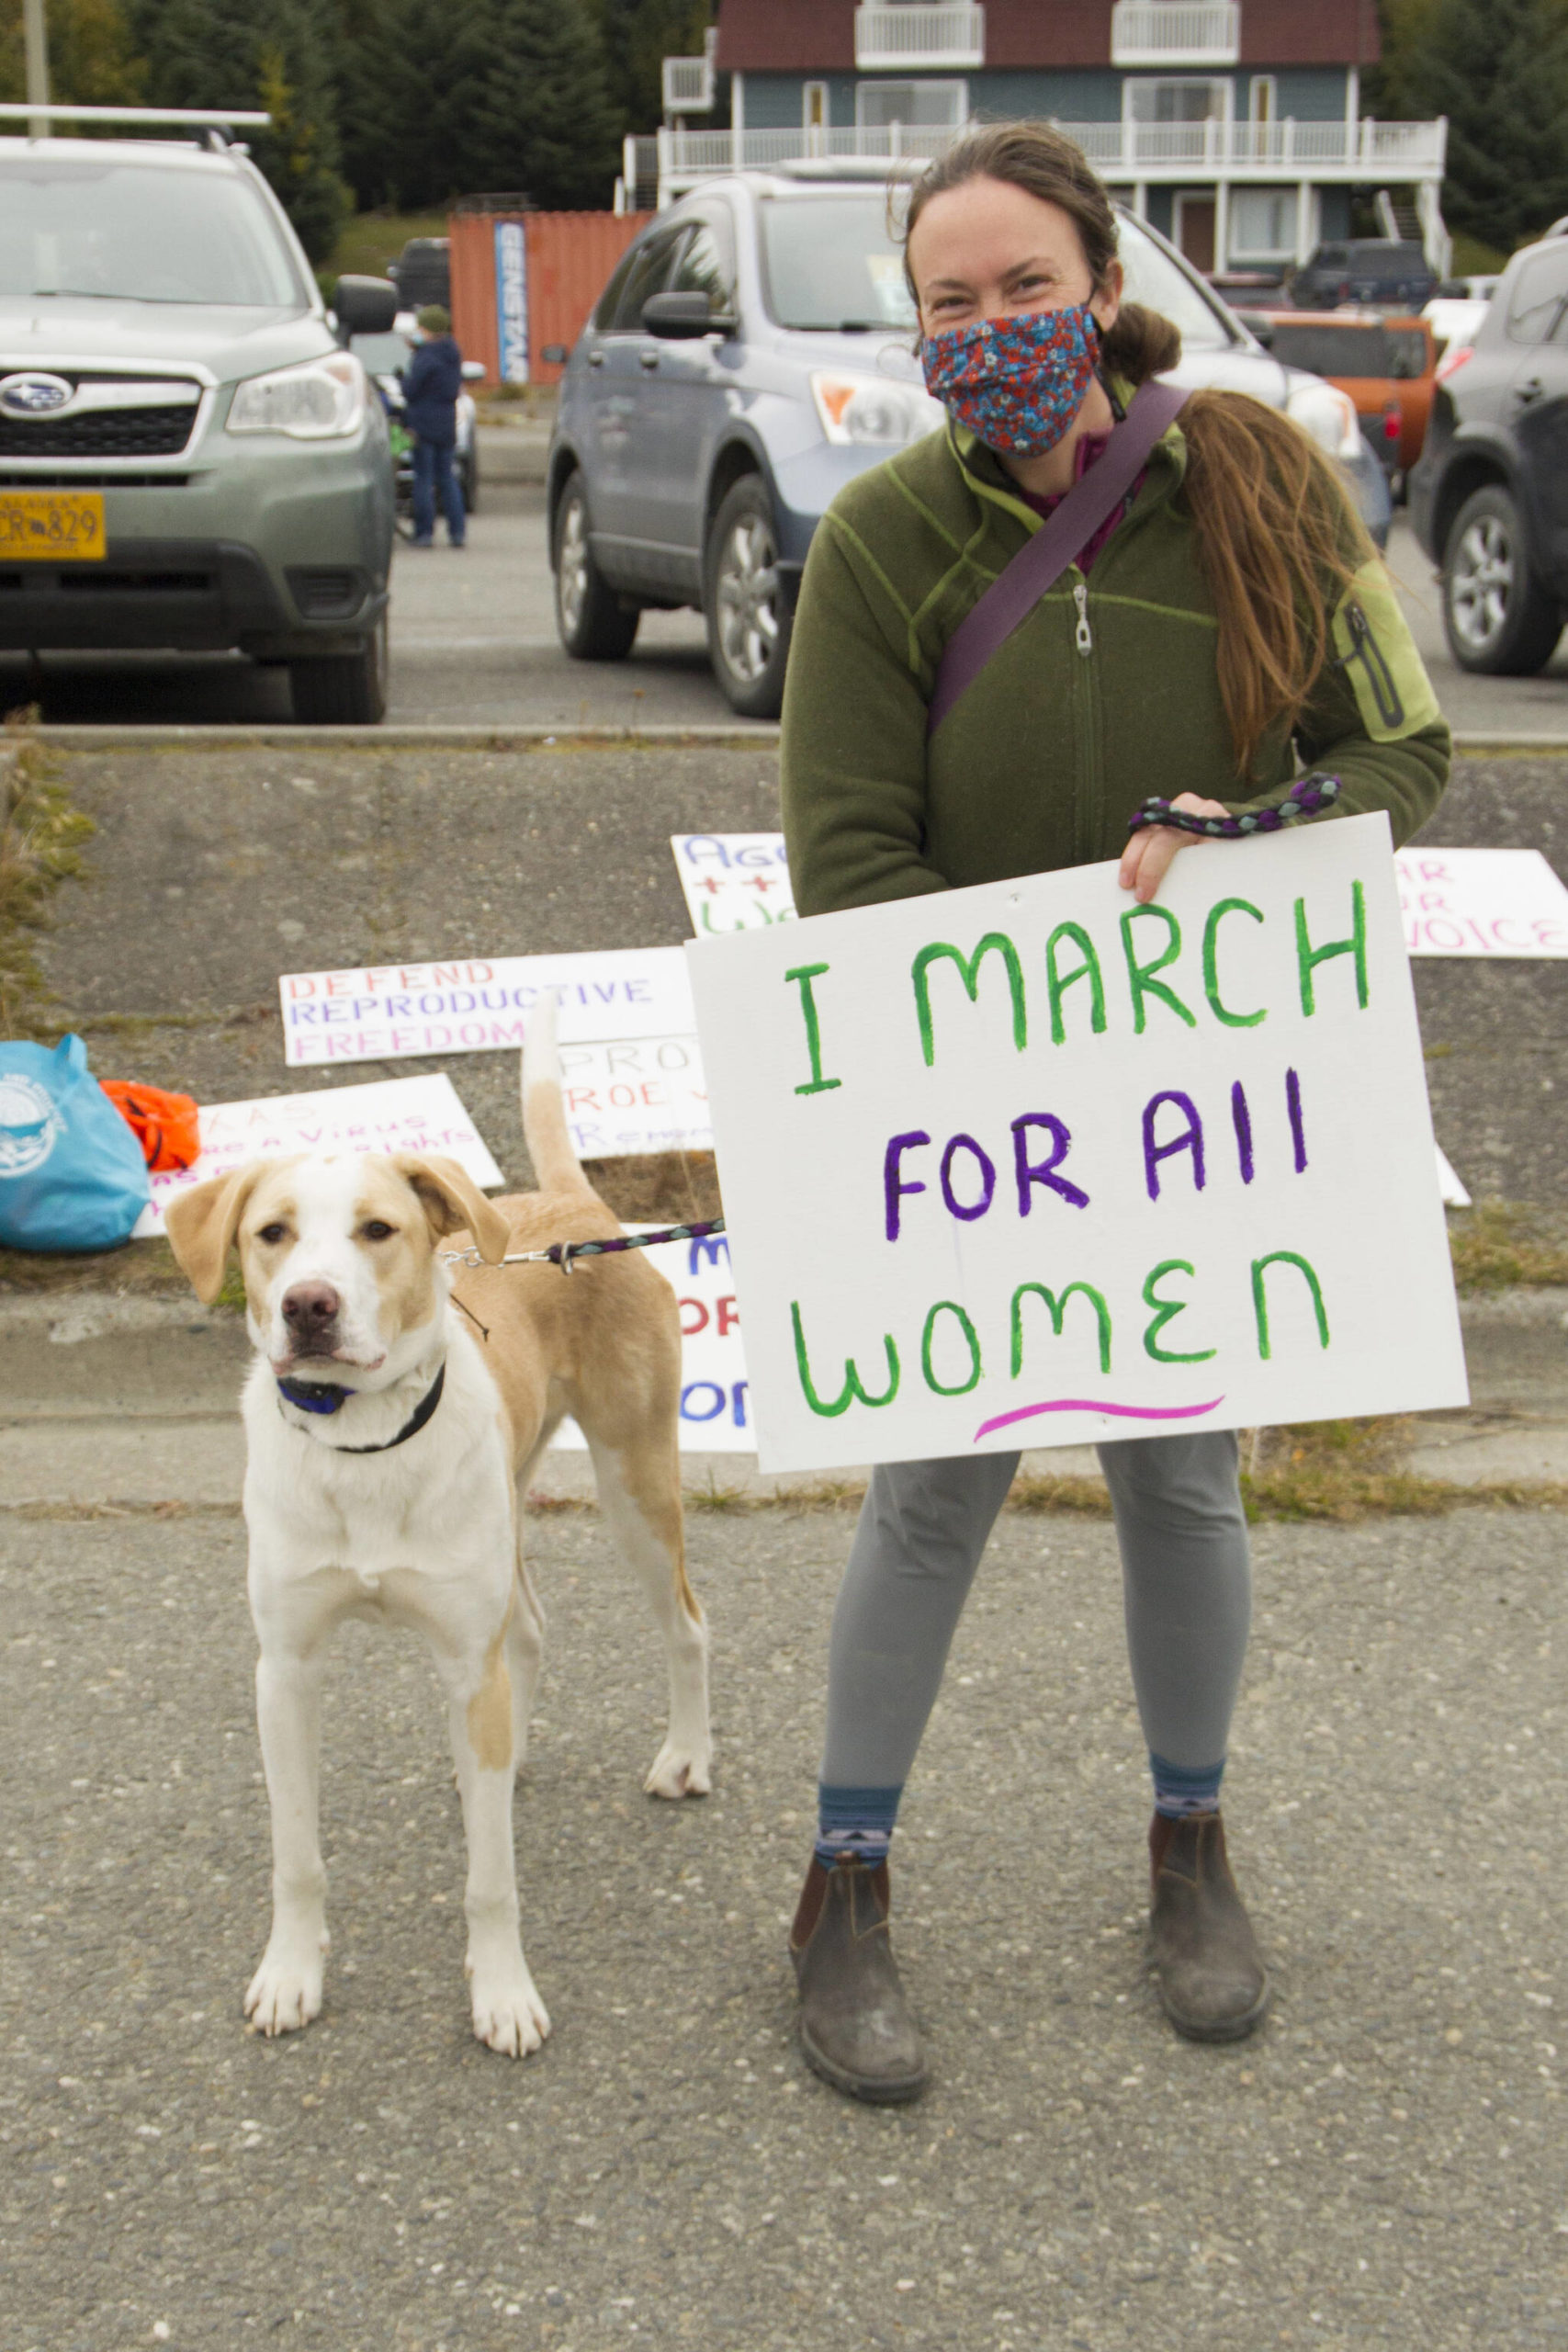 Liz Mering and her dog Pancake participated in Saturday’s women’s rights march. (Photo by Sarah Knapp/Homer News)